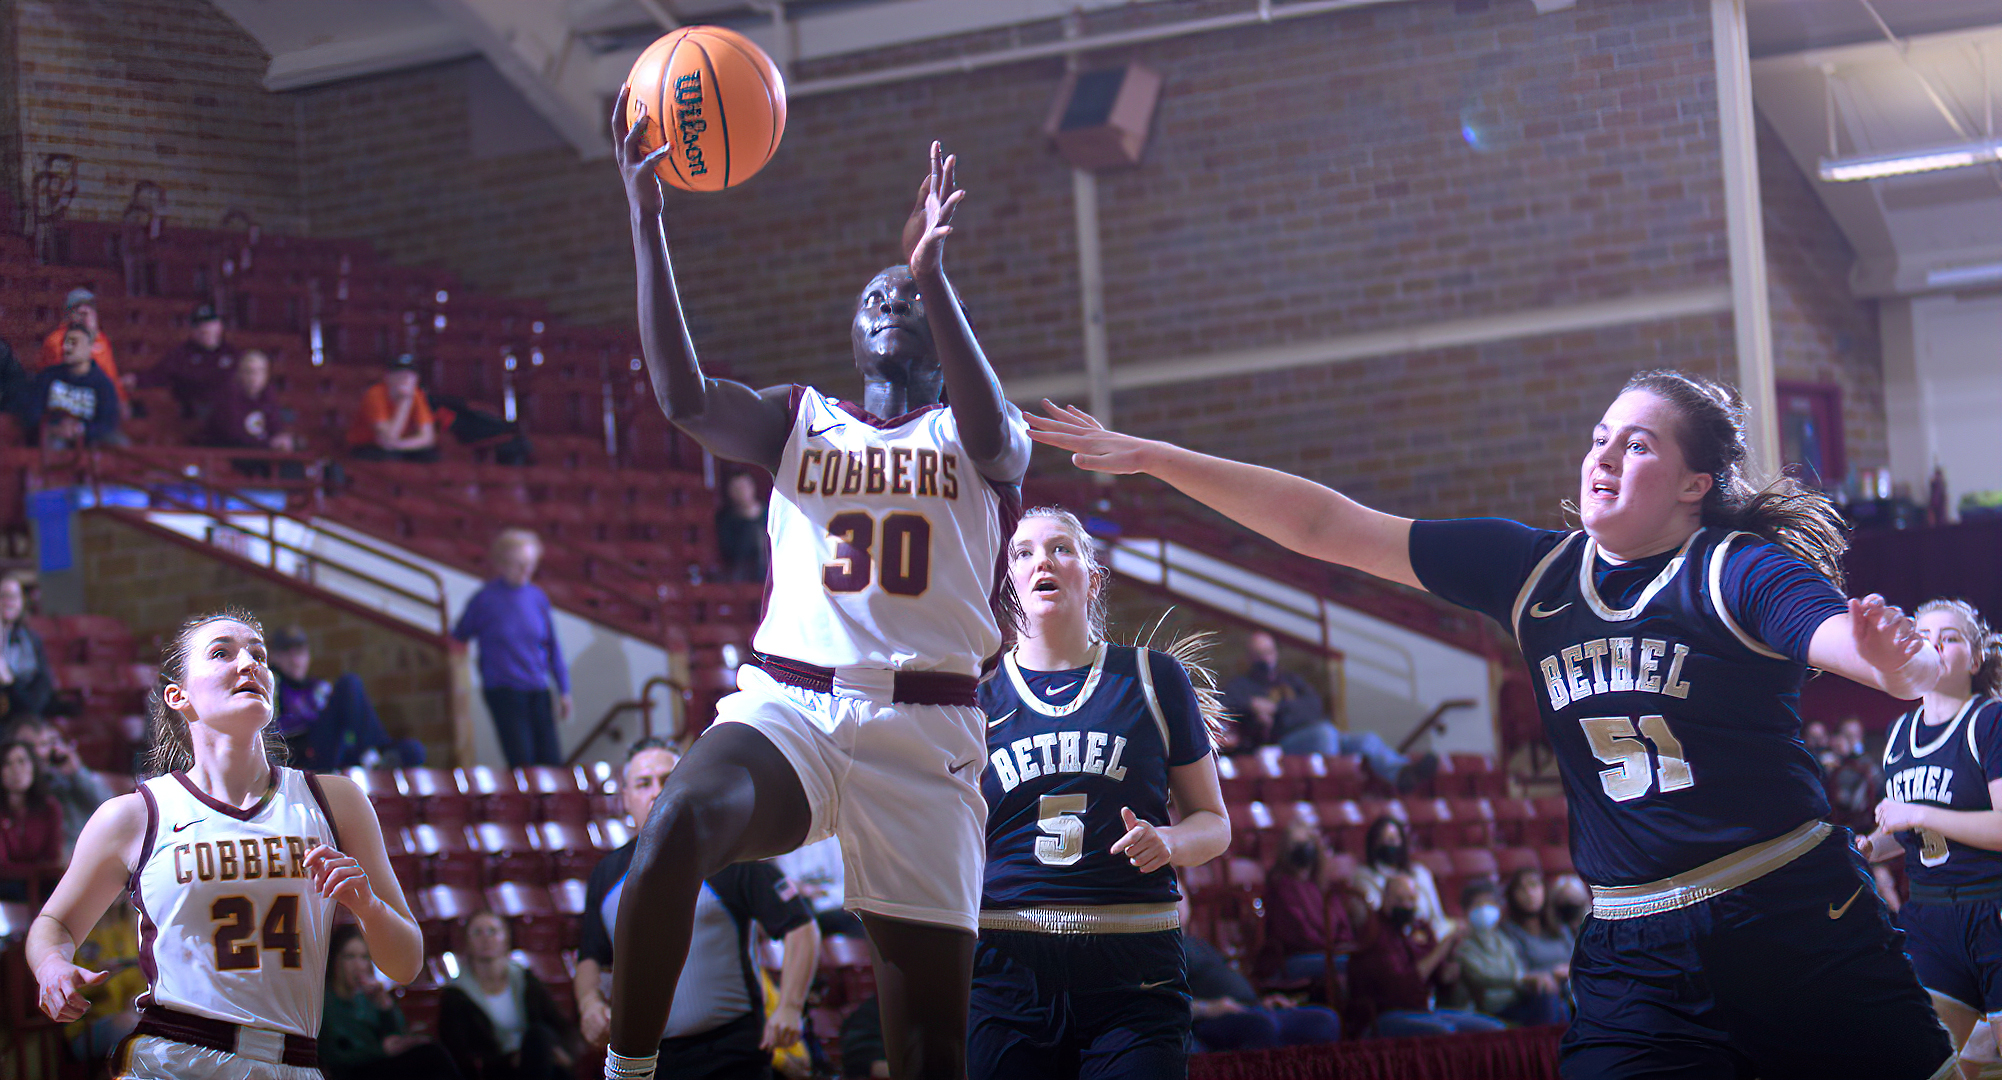 Senior Mary Sem drives past the Bethel defense on her way to a pair of her team-high 15 points in the Cobbers' home game with the Royals.